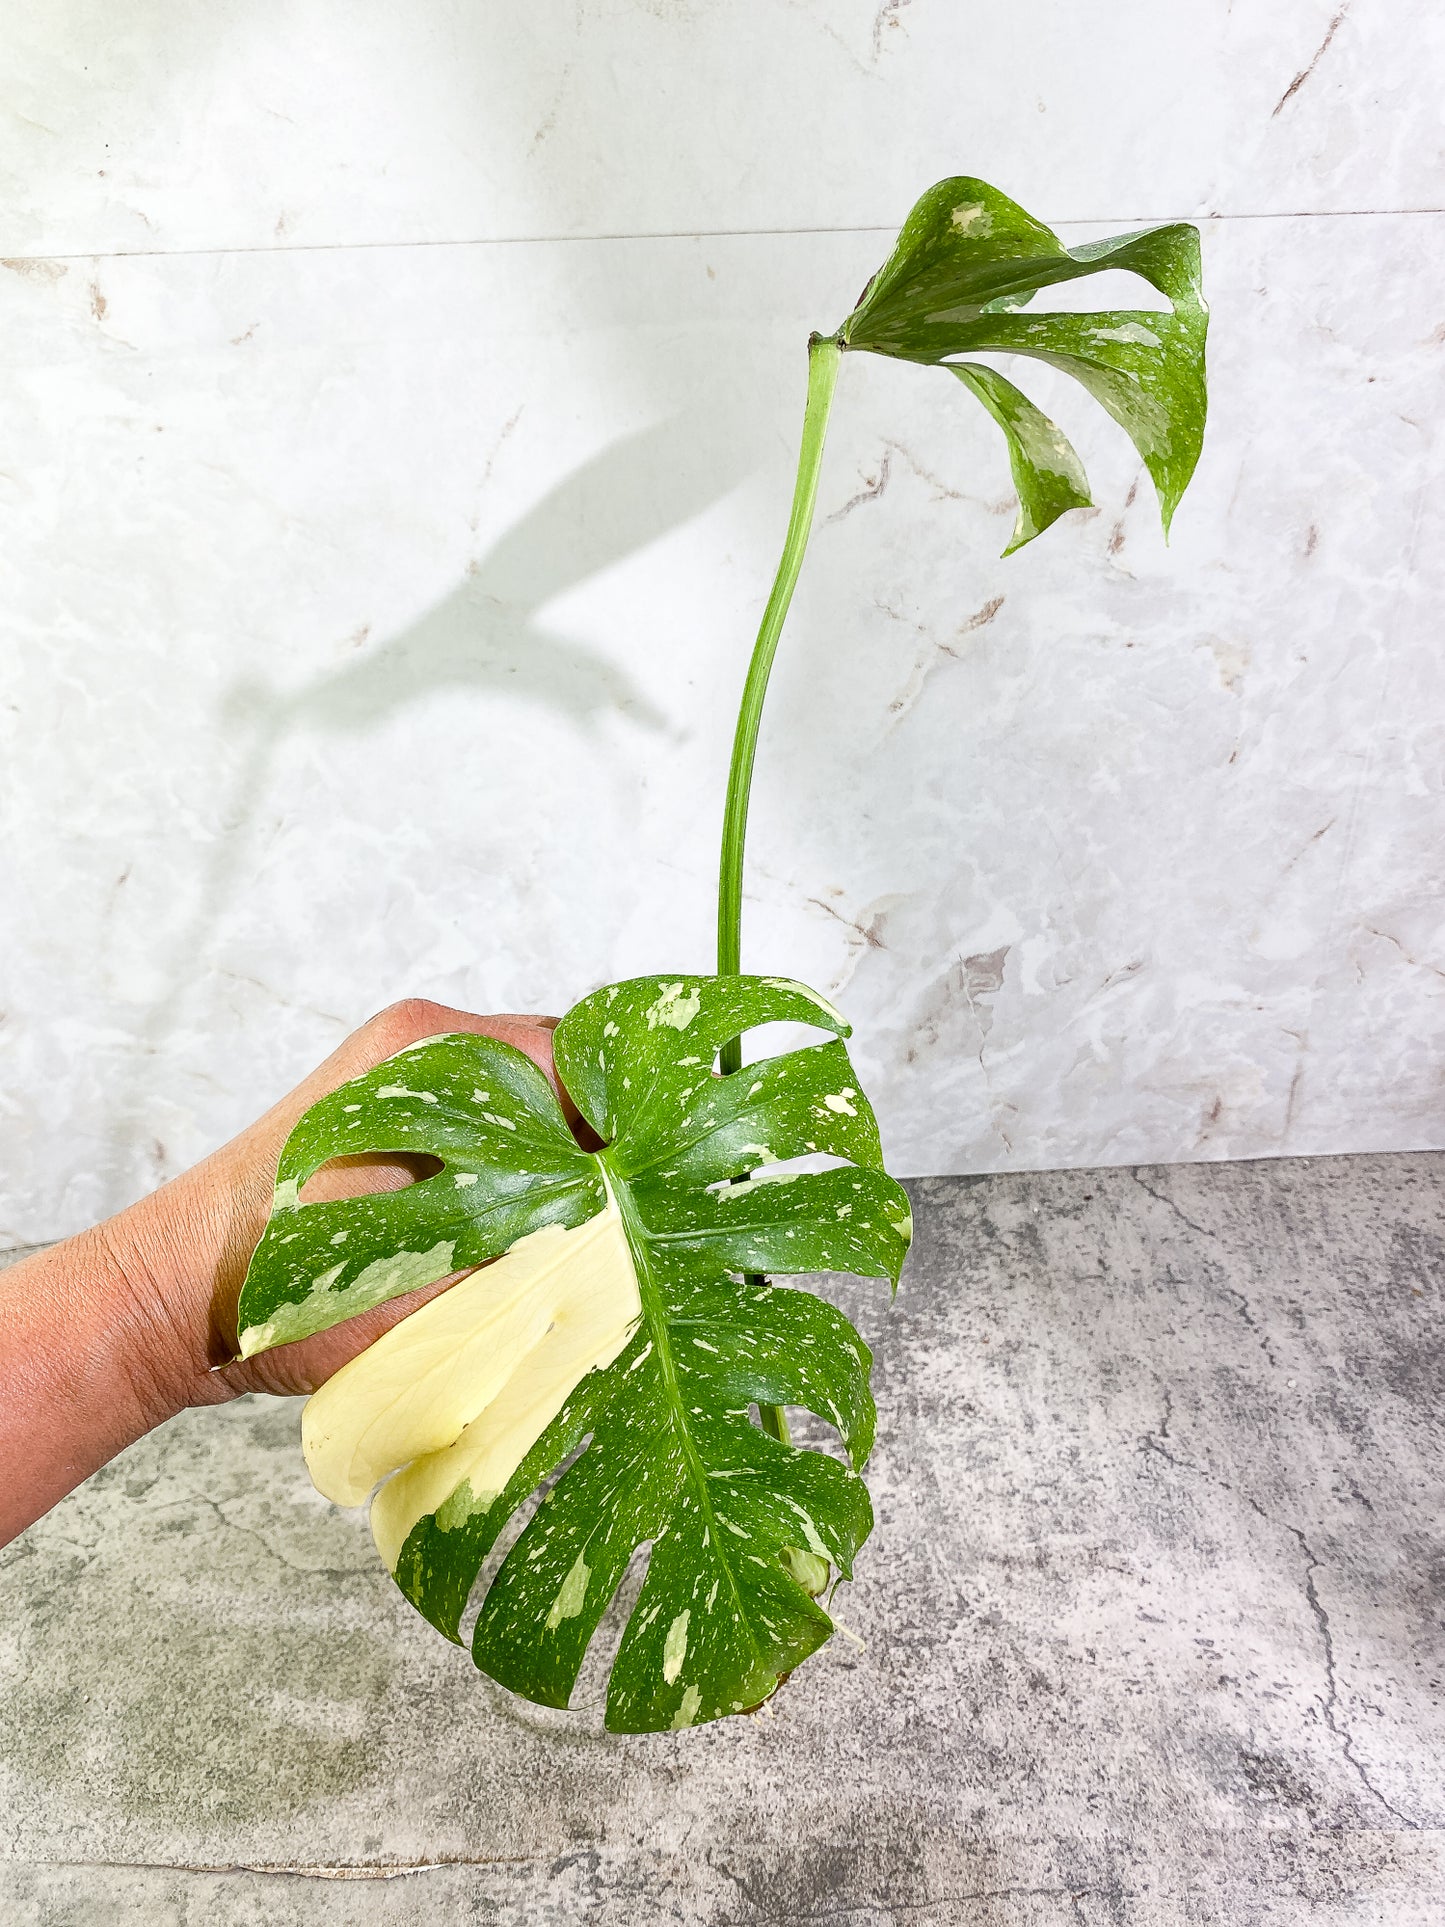 Monstera Thai Constellation 2 leaves Rooting Top Cutting